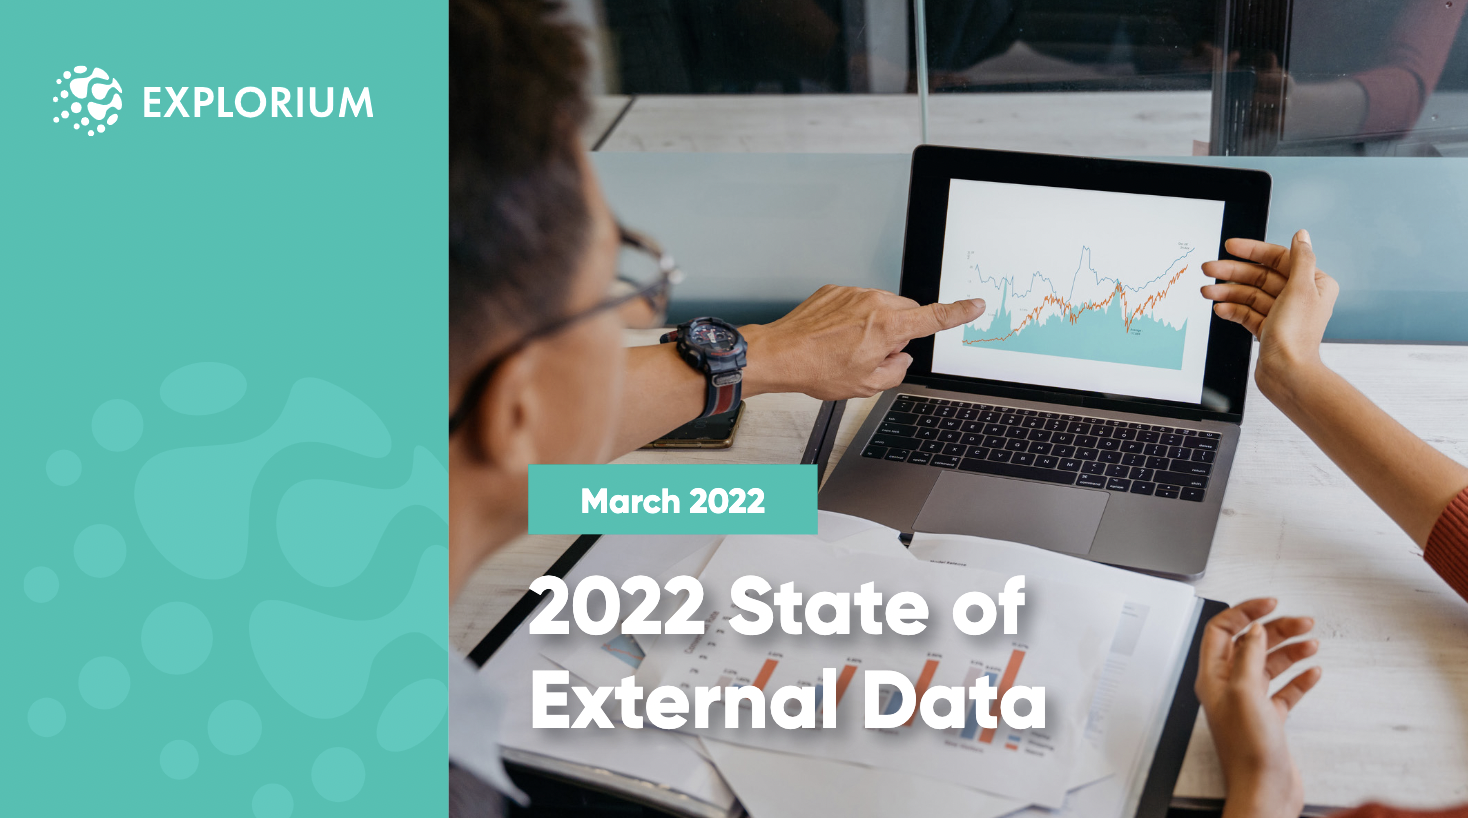 The 2022 State of External Data